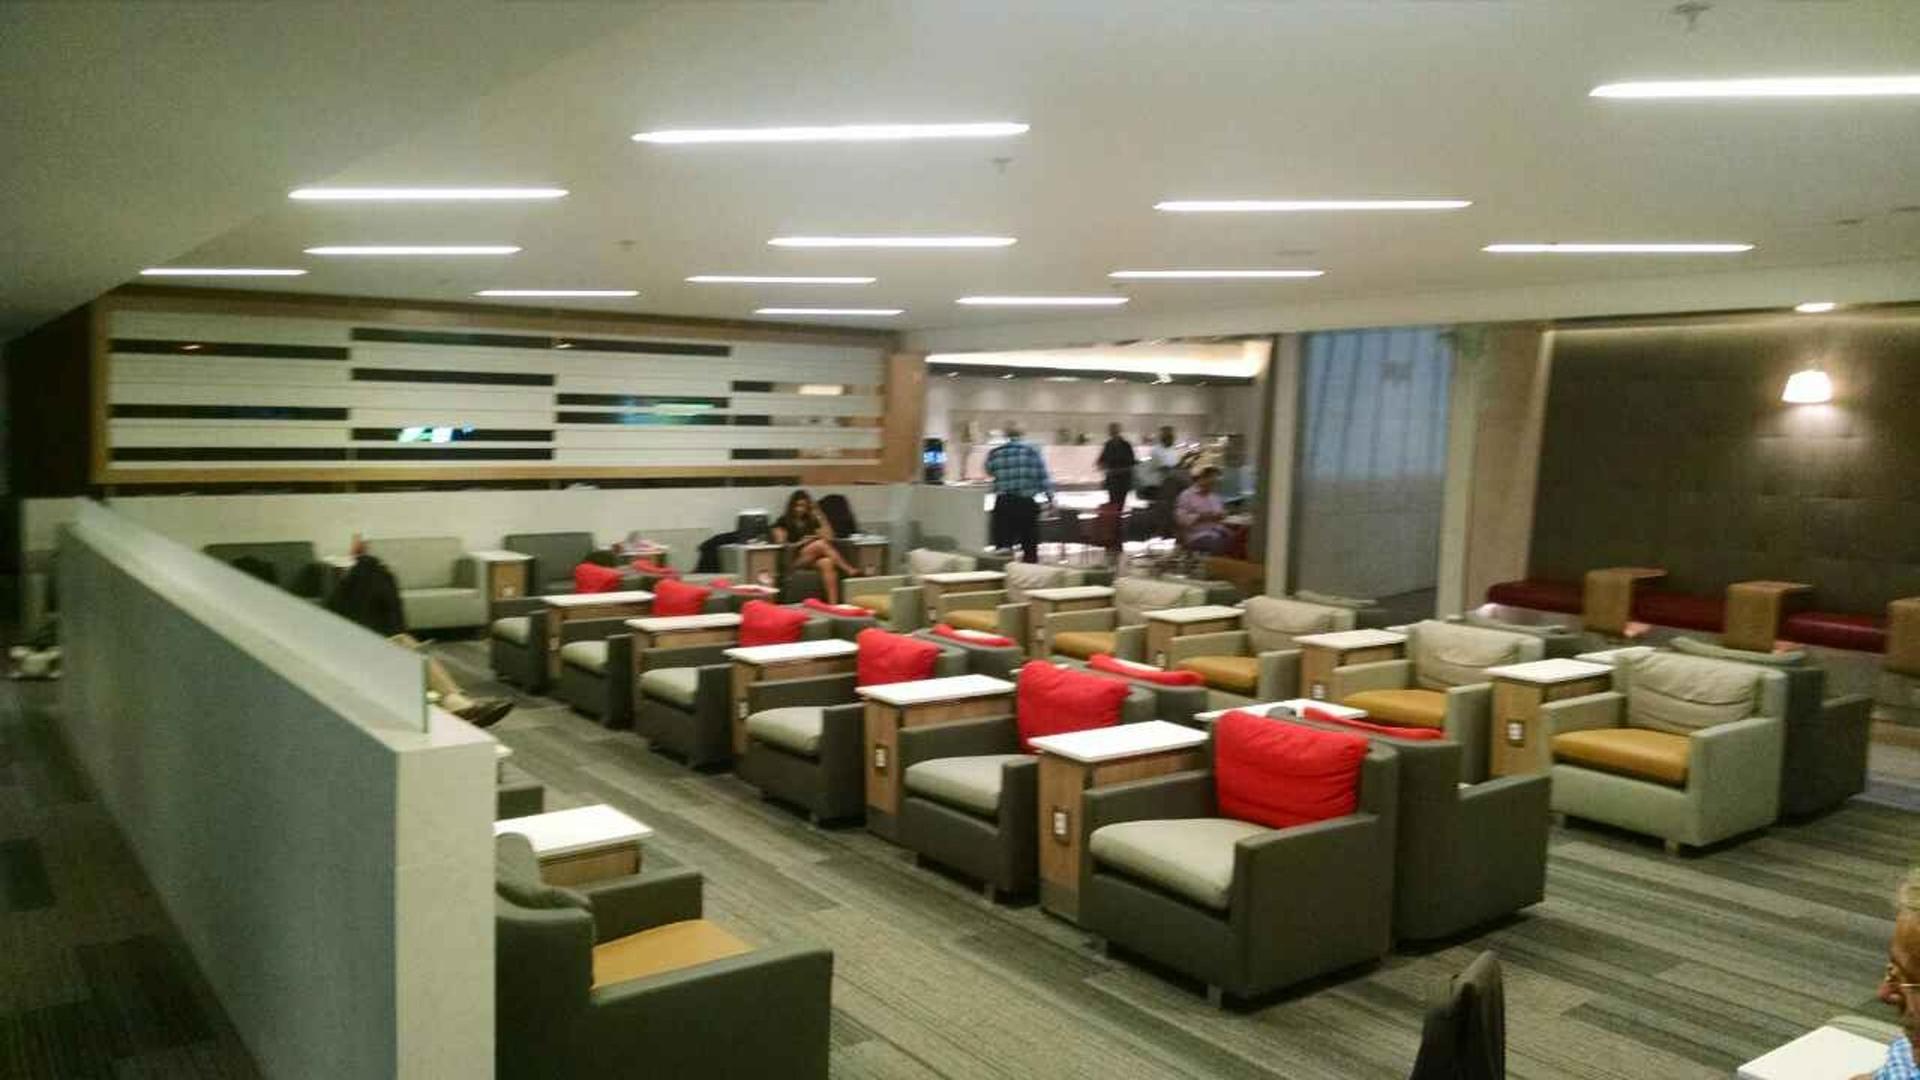 American Airlines Admirals Club image 16 of 30